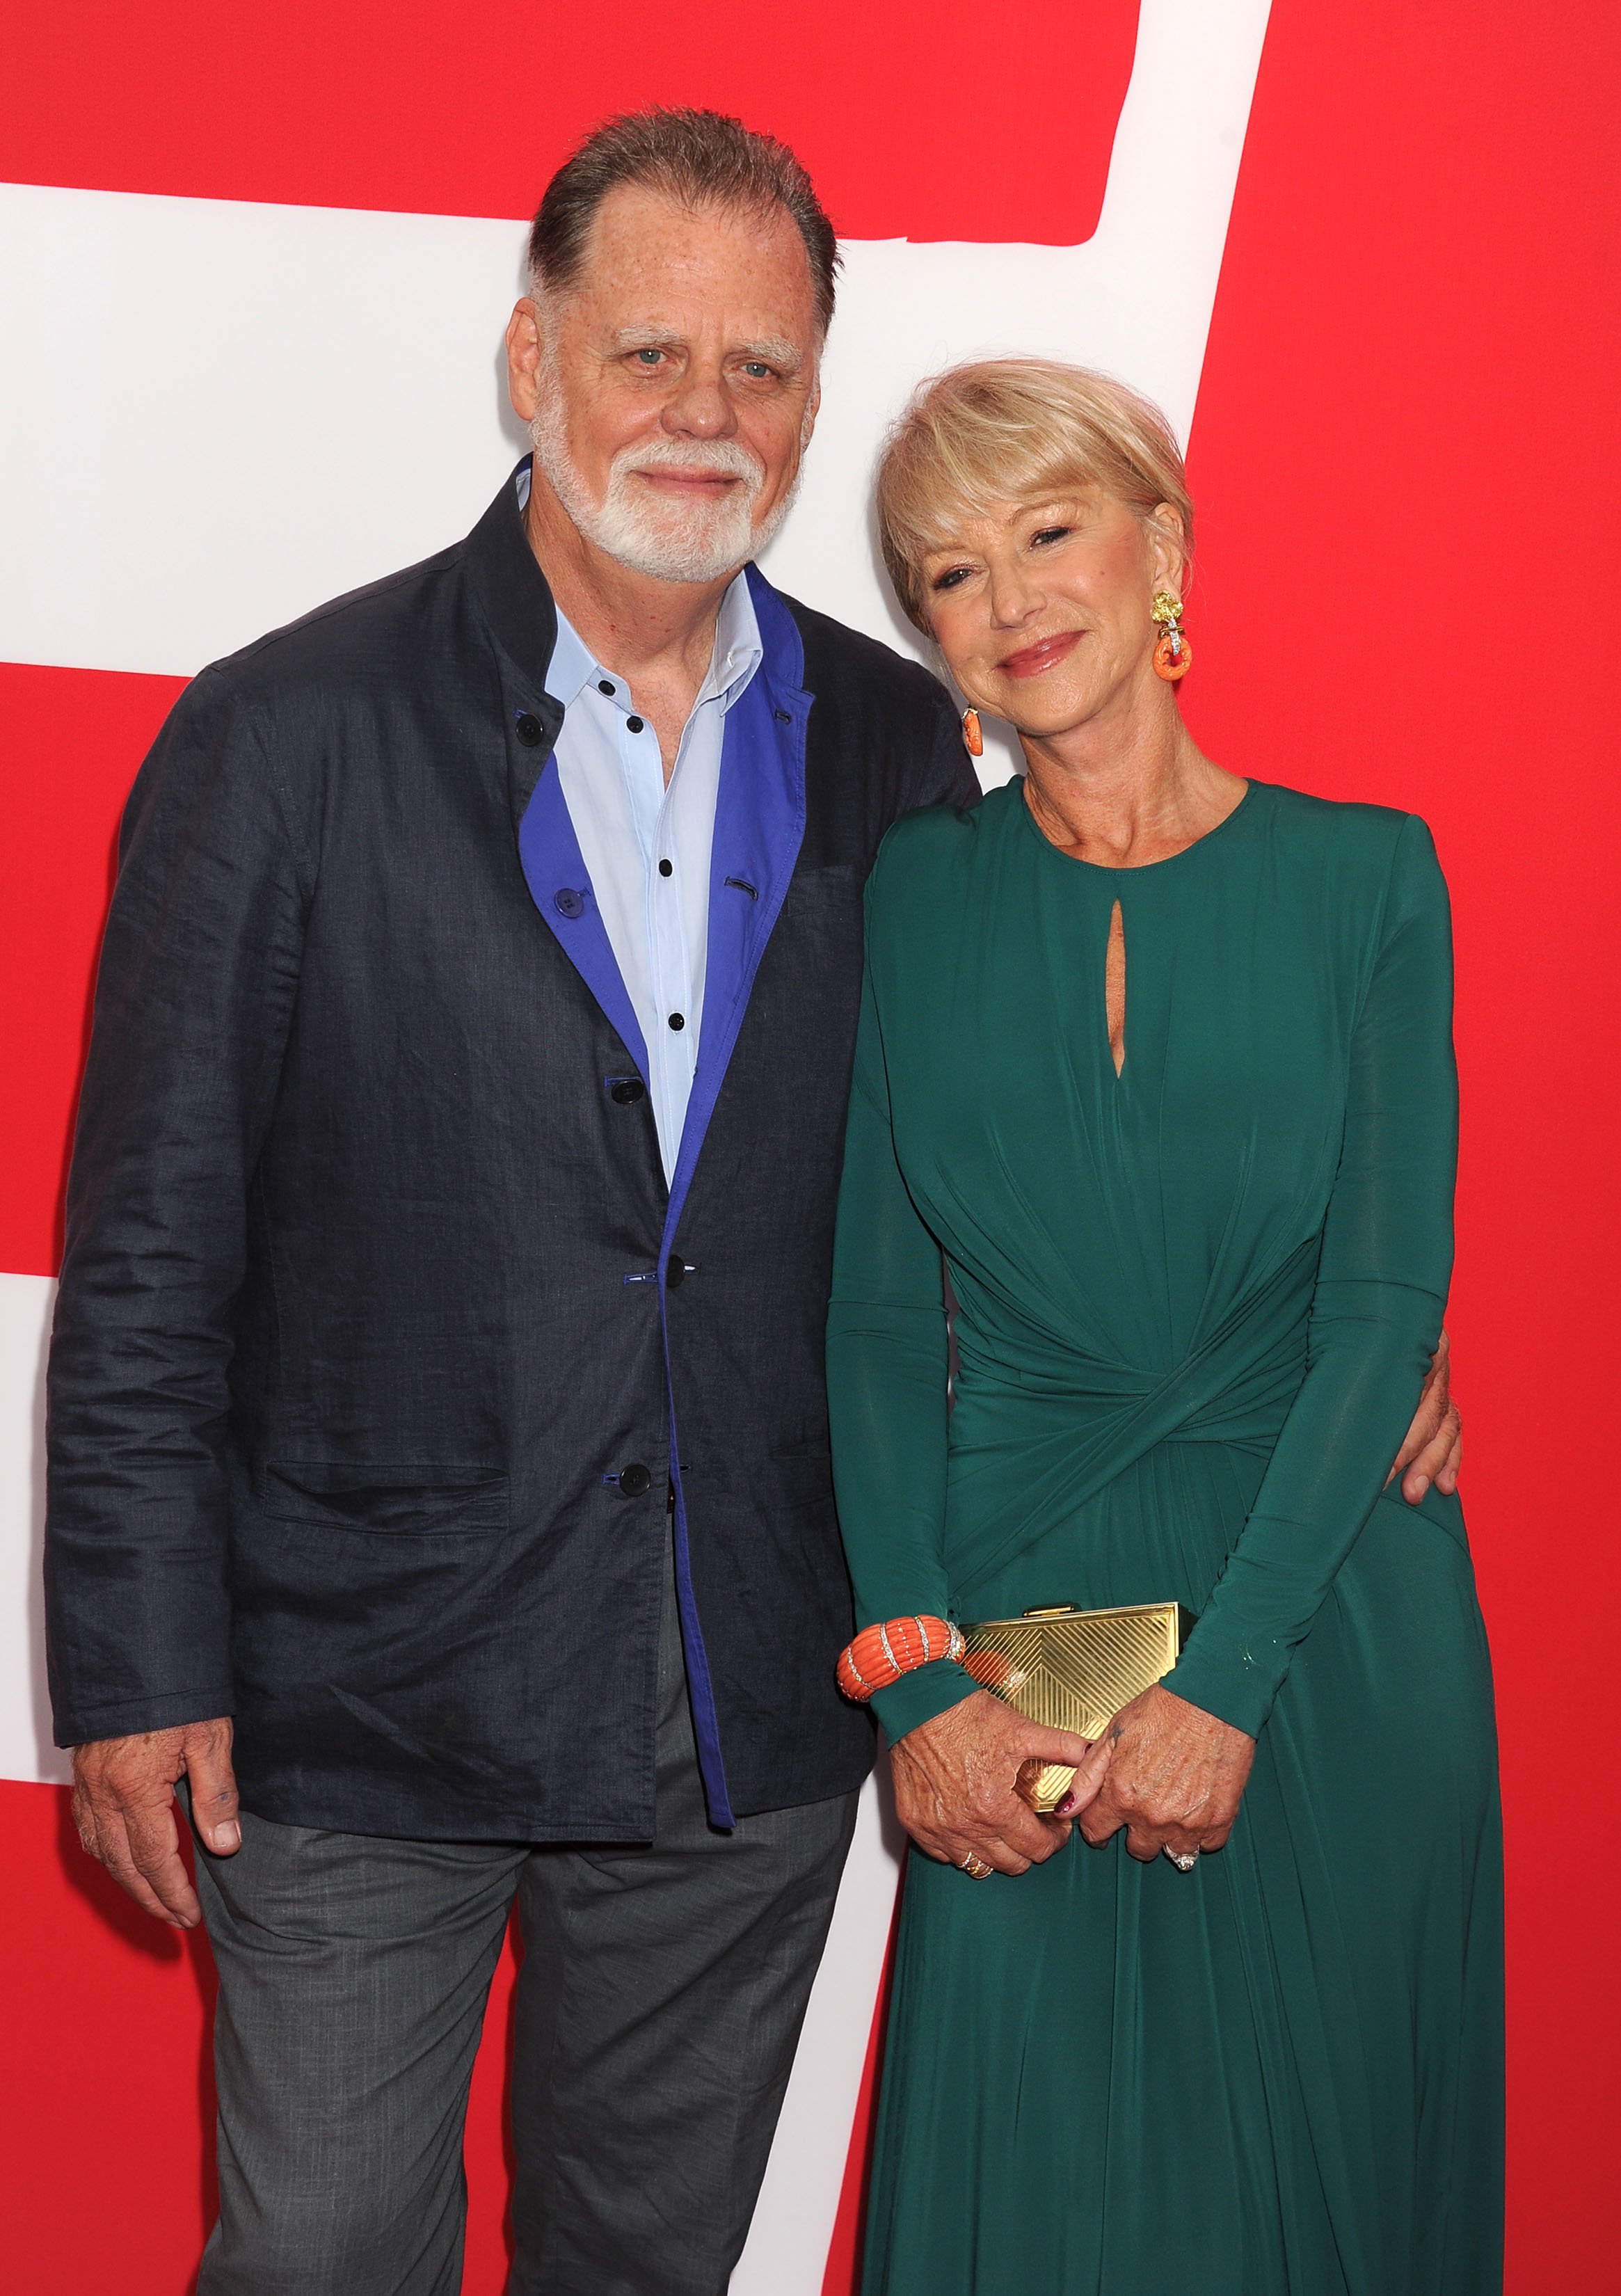  Director Taylor Hackford and actress wife Helen Mirren arrive at the 'RED 2' - Los Angeles Premiere at Westwood Village on July 11, 2013 | Source: Getty Images